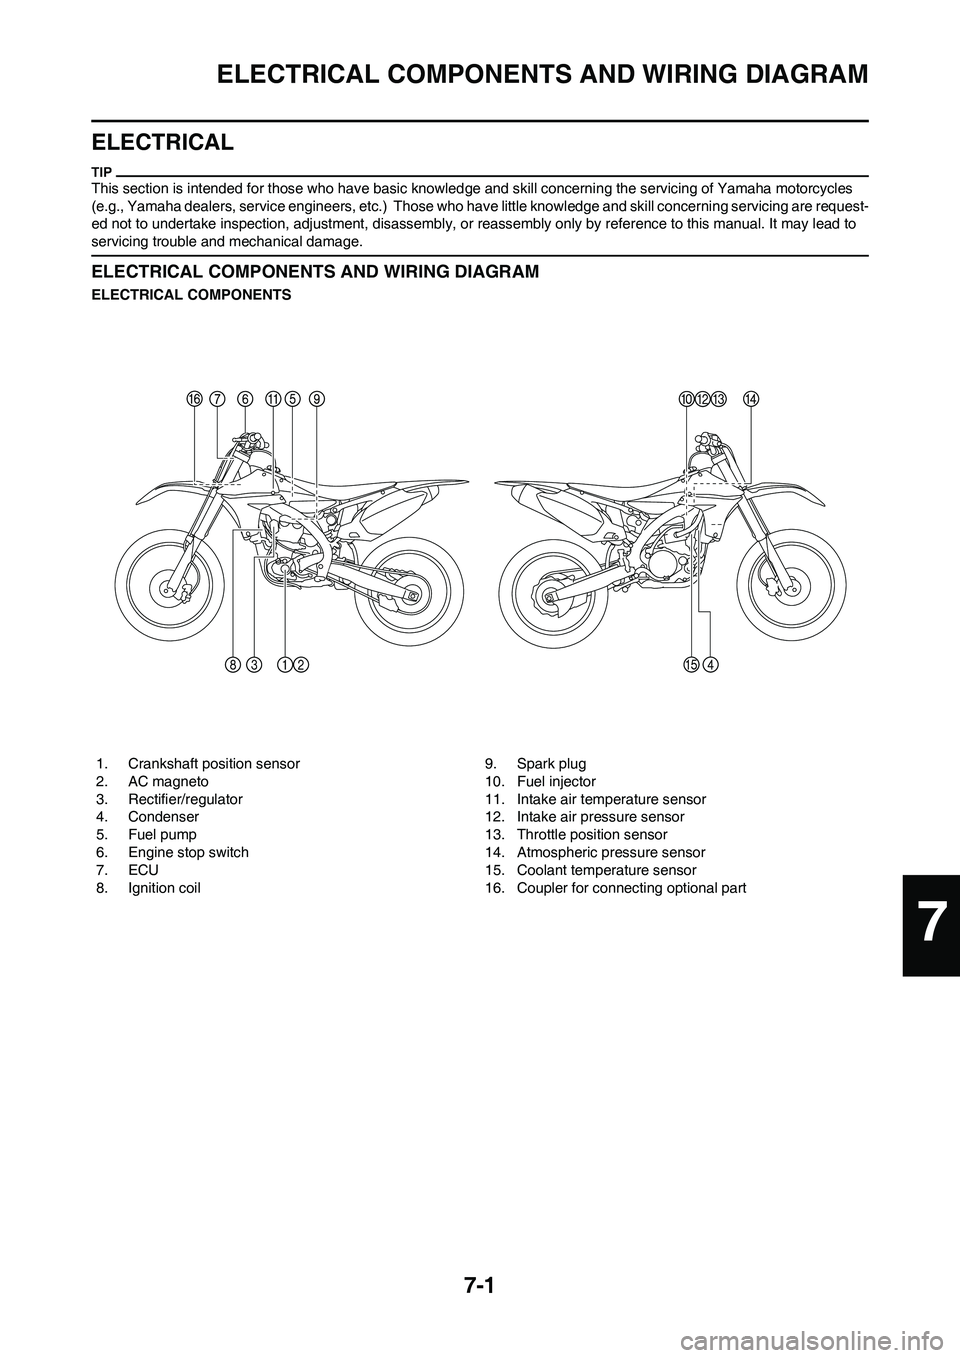 YAMAHA YZ450F 2011  Owners Manual 7-1
ELECTRICAL COMPONENTS AND WIRING DIAGRAM
ELECTRICAL
This section is intended for those who have basic knowledge and skill concerning the servicing of Yamaha motorcycles 
(e.g., Yamaha dealers, ser